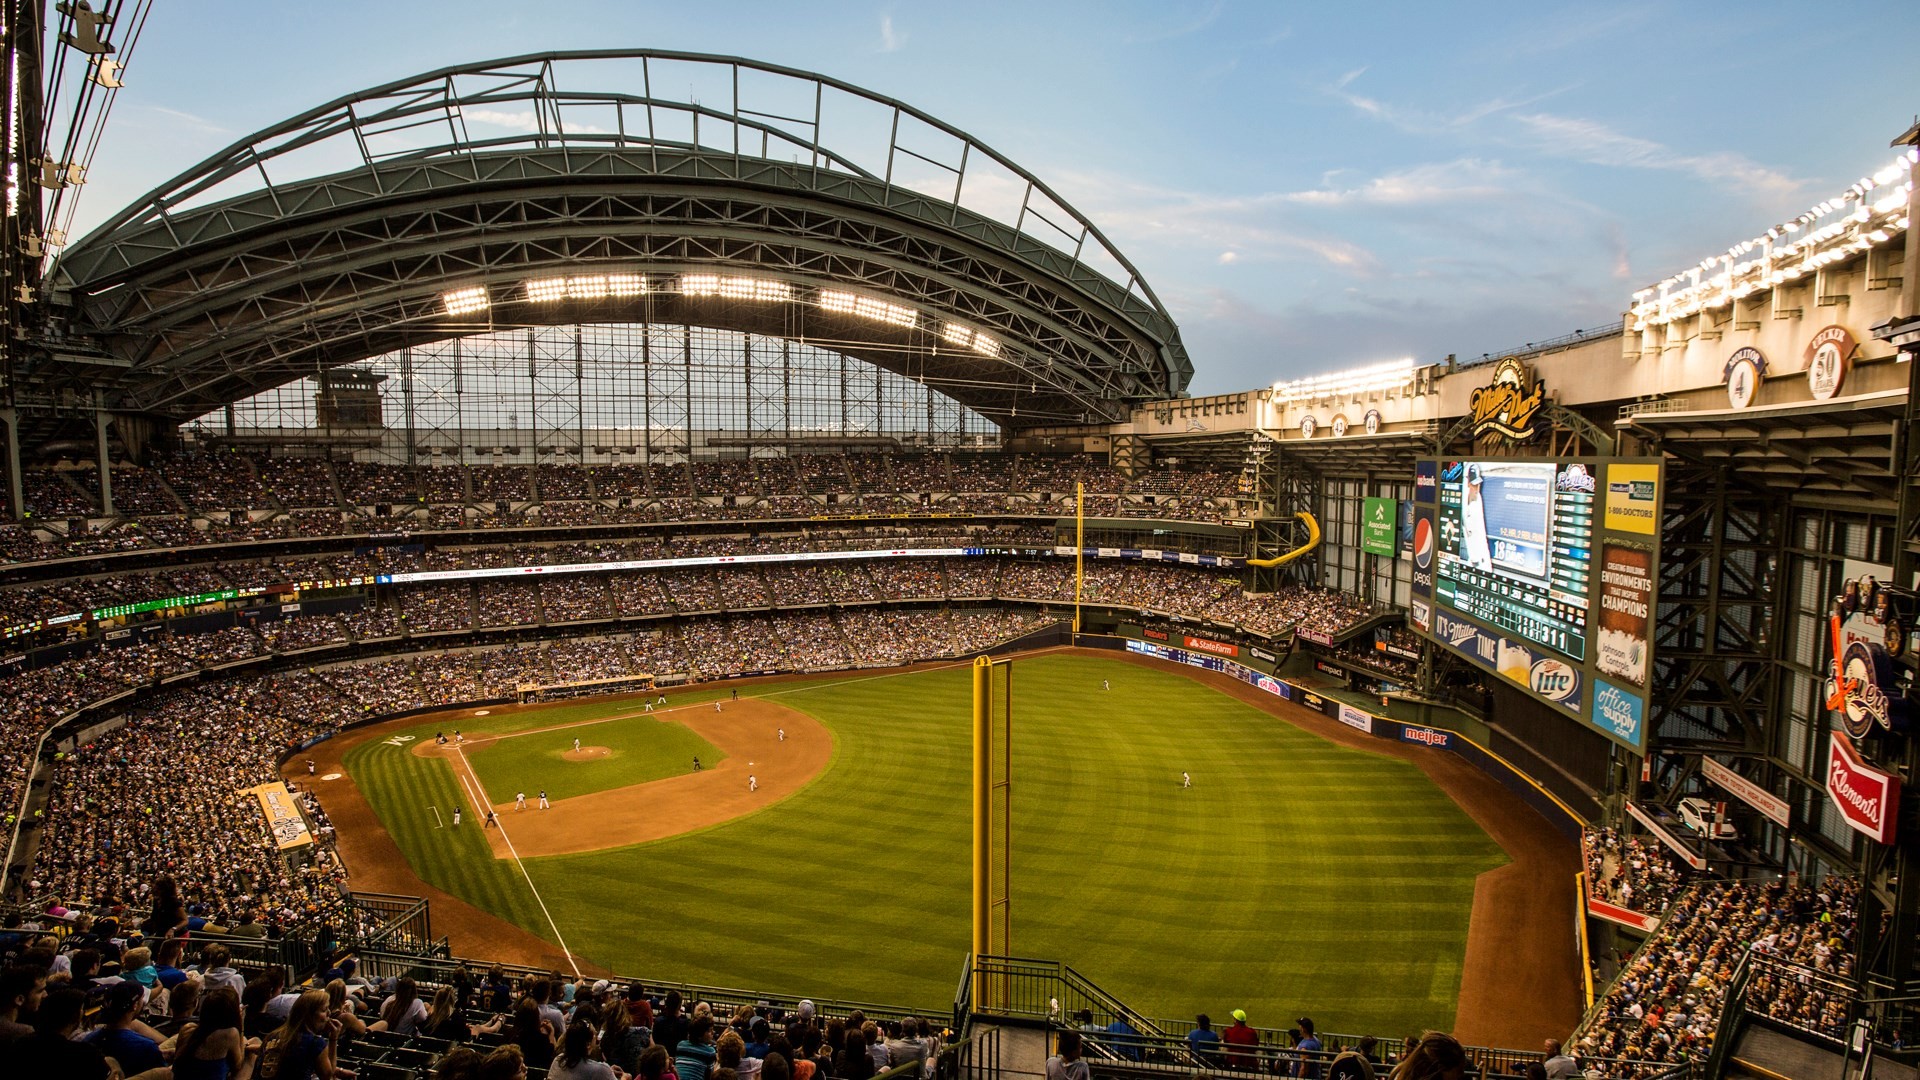 Milwaukee Brewers Stadium HD Wallpapers With high-resolution 1920X1080 pixel. You can use this wallpaper for Mac Desktop Wallpaper, Laptop Screensavers, Android Wallpapers, Tablet or iPhone Home Screen and another mobile phone device